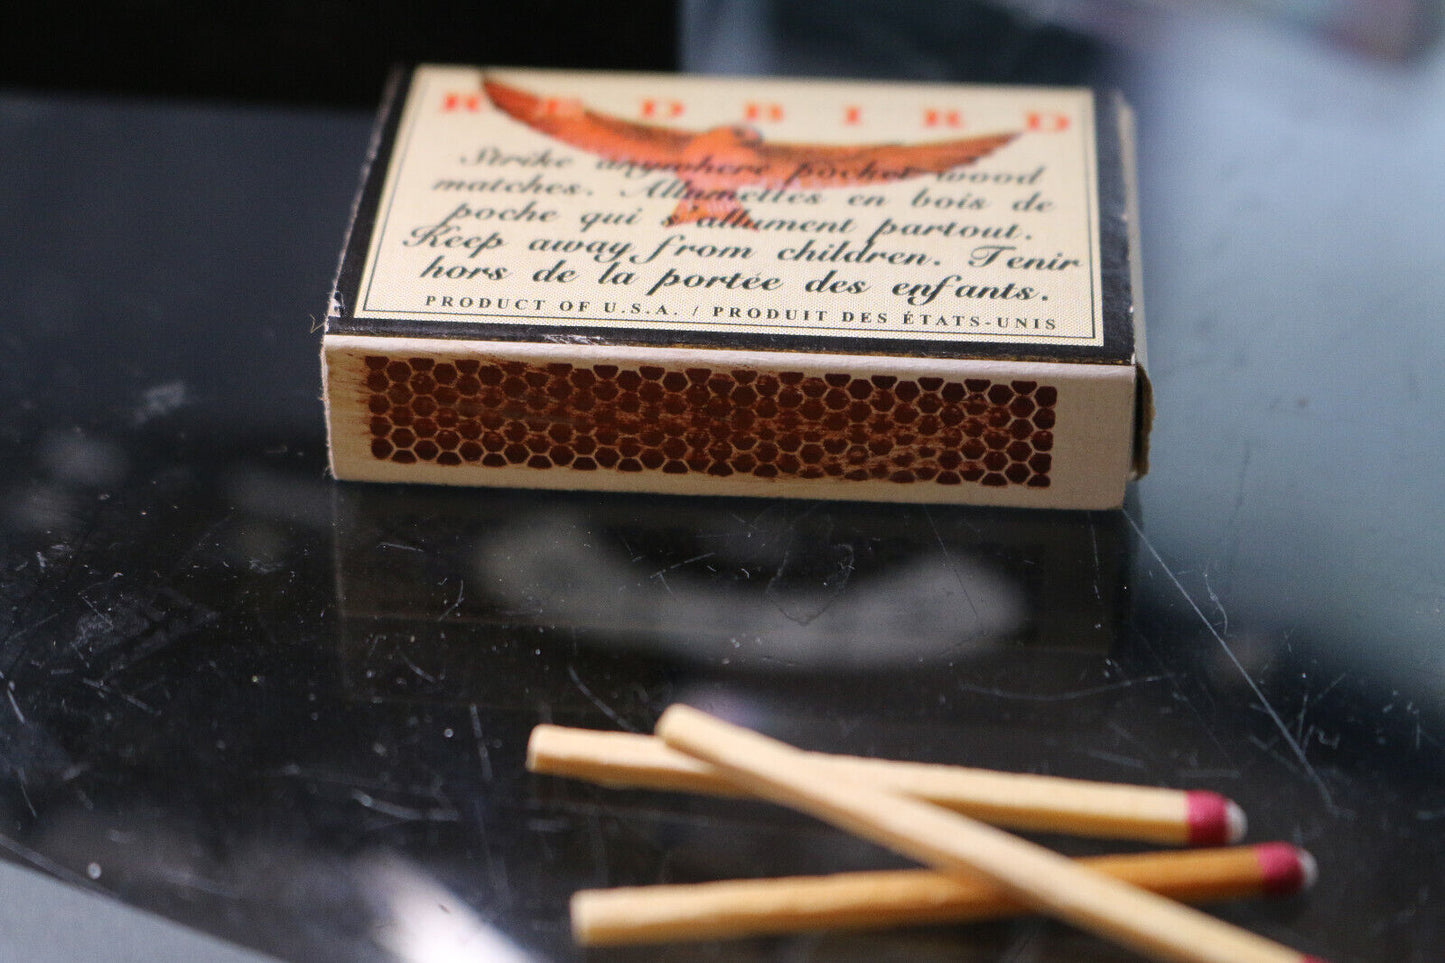 Vintage Box Of Redbird 4 Wood Matches French & English Variant